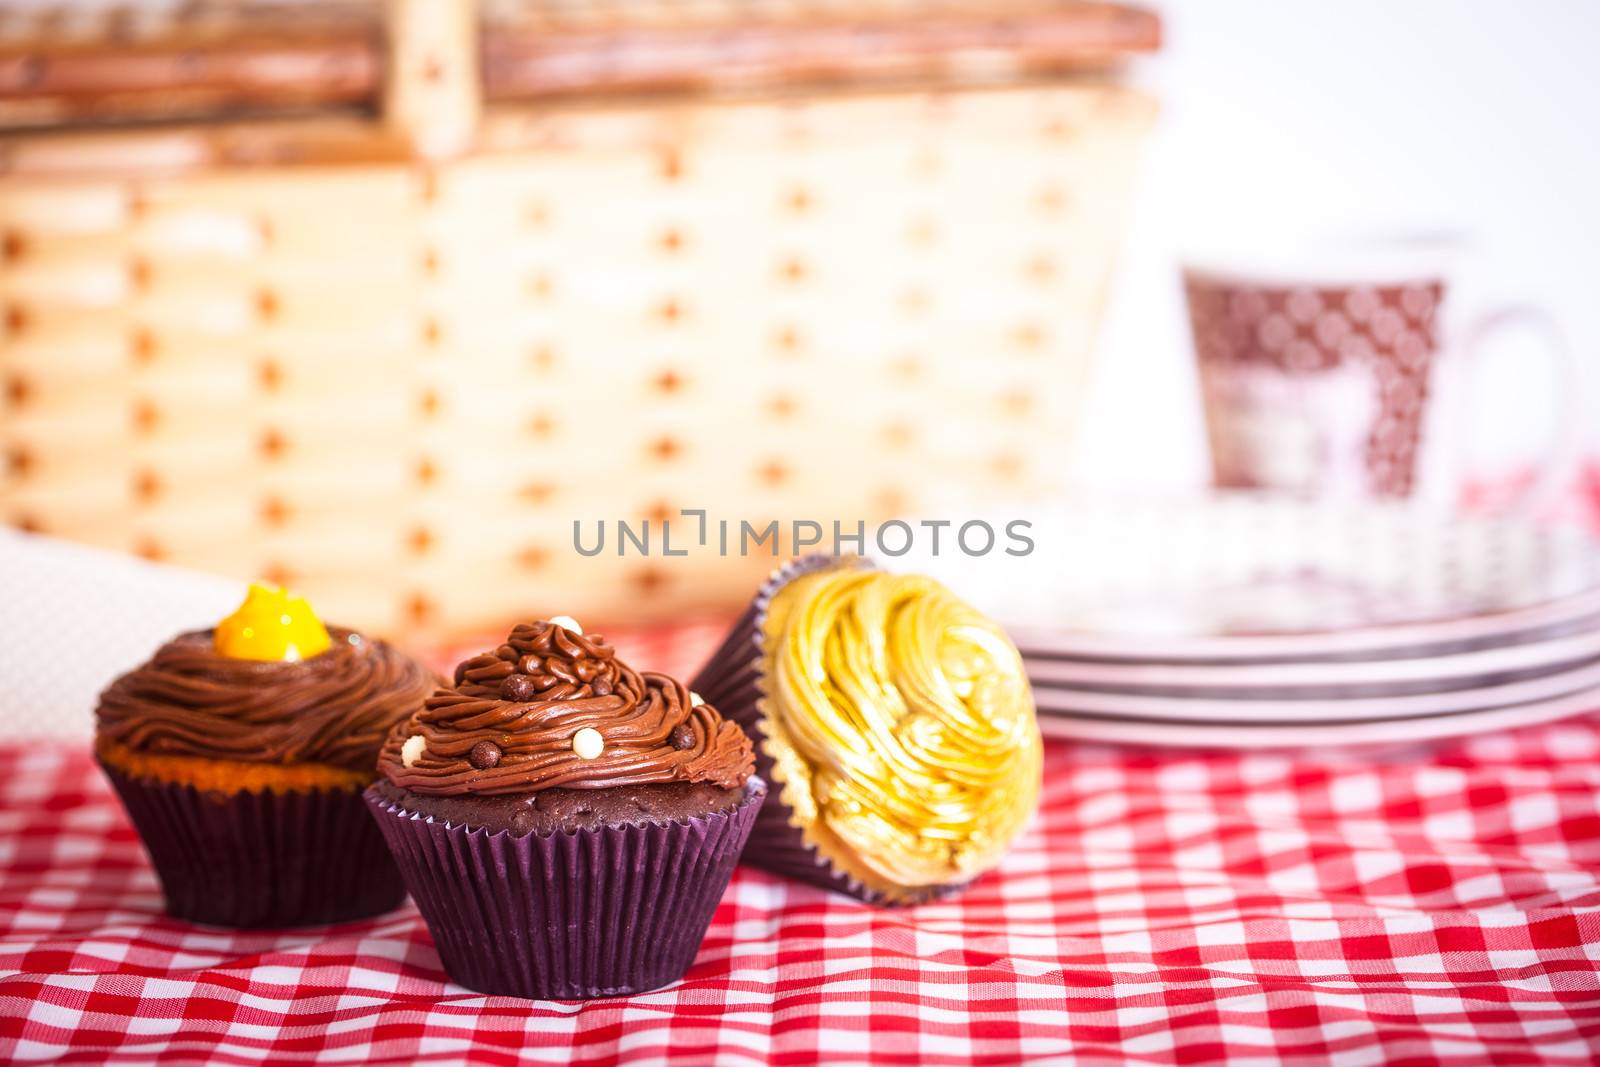 Picnic and Cupcakes by Daniel_Wiedemann